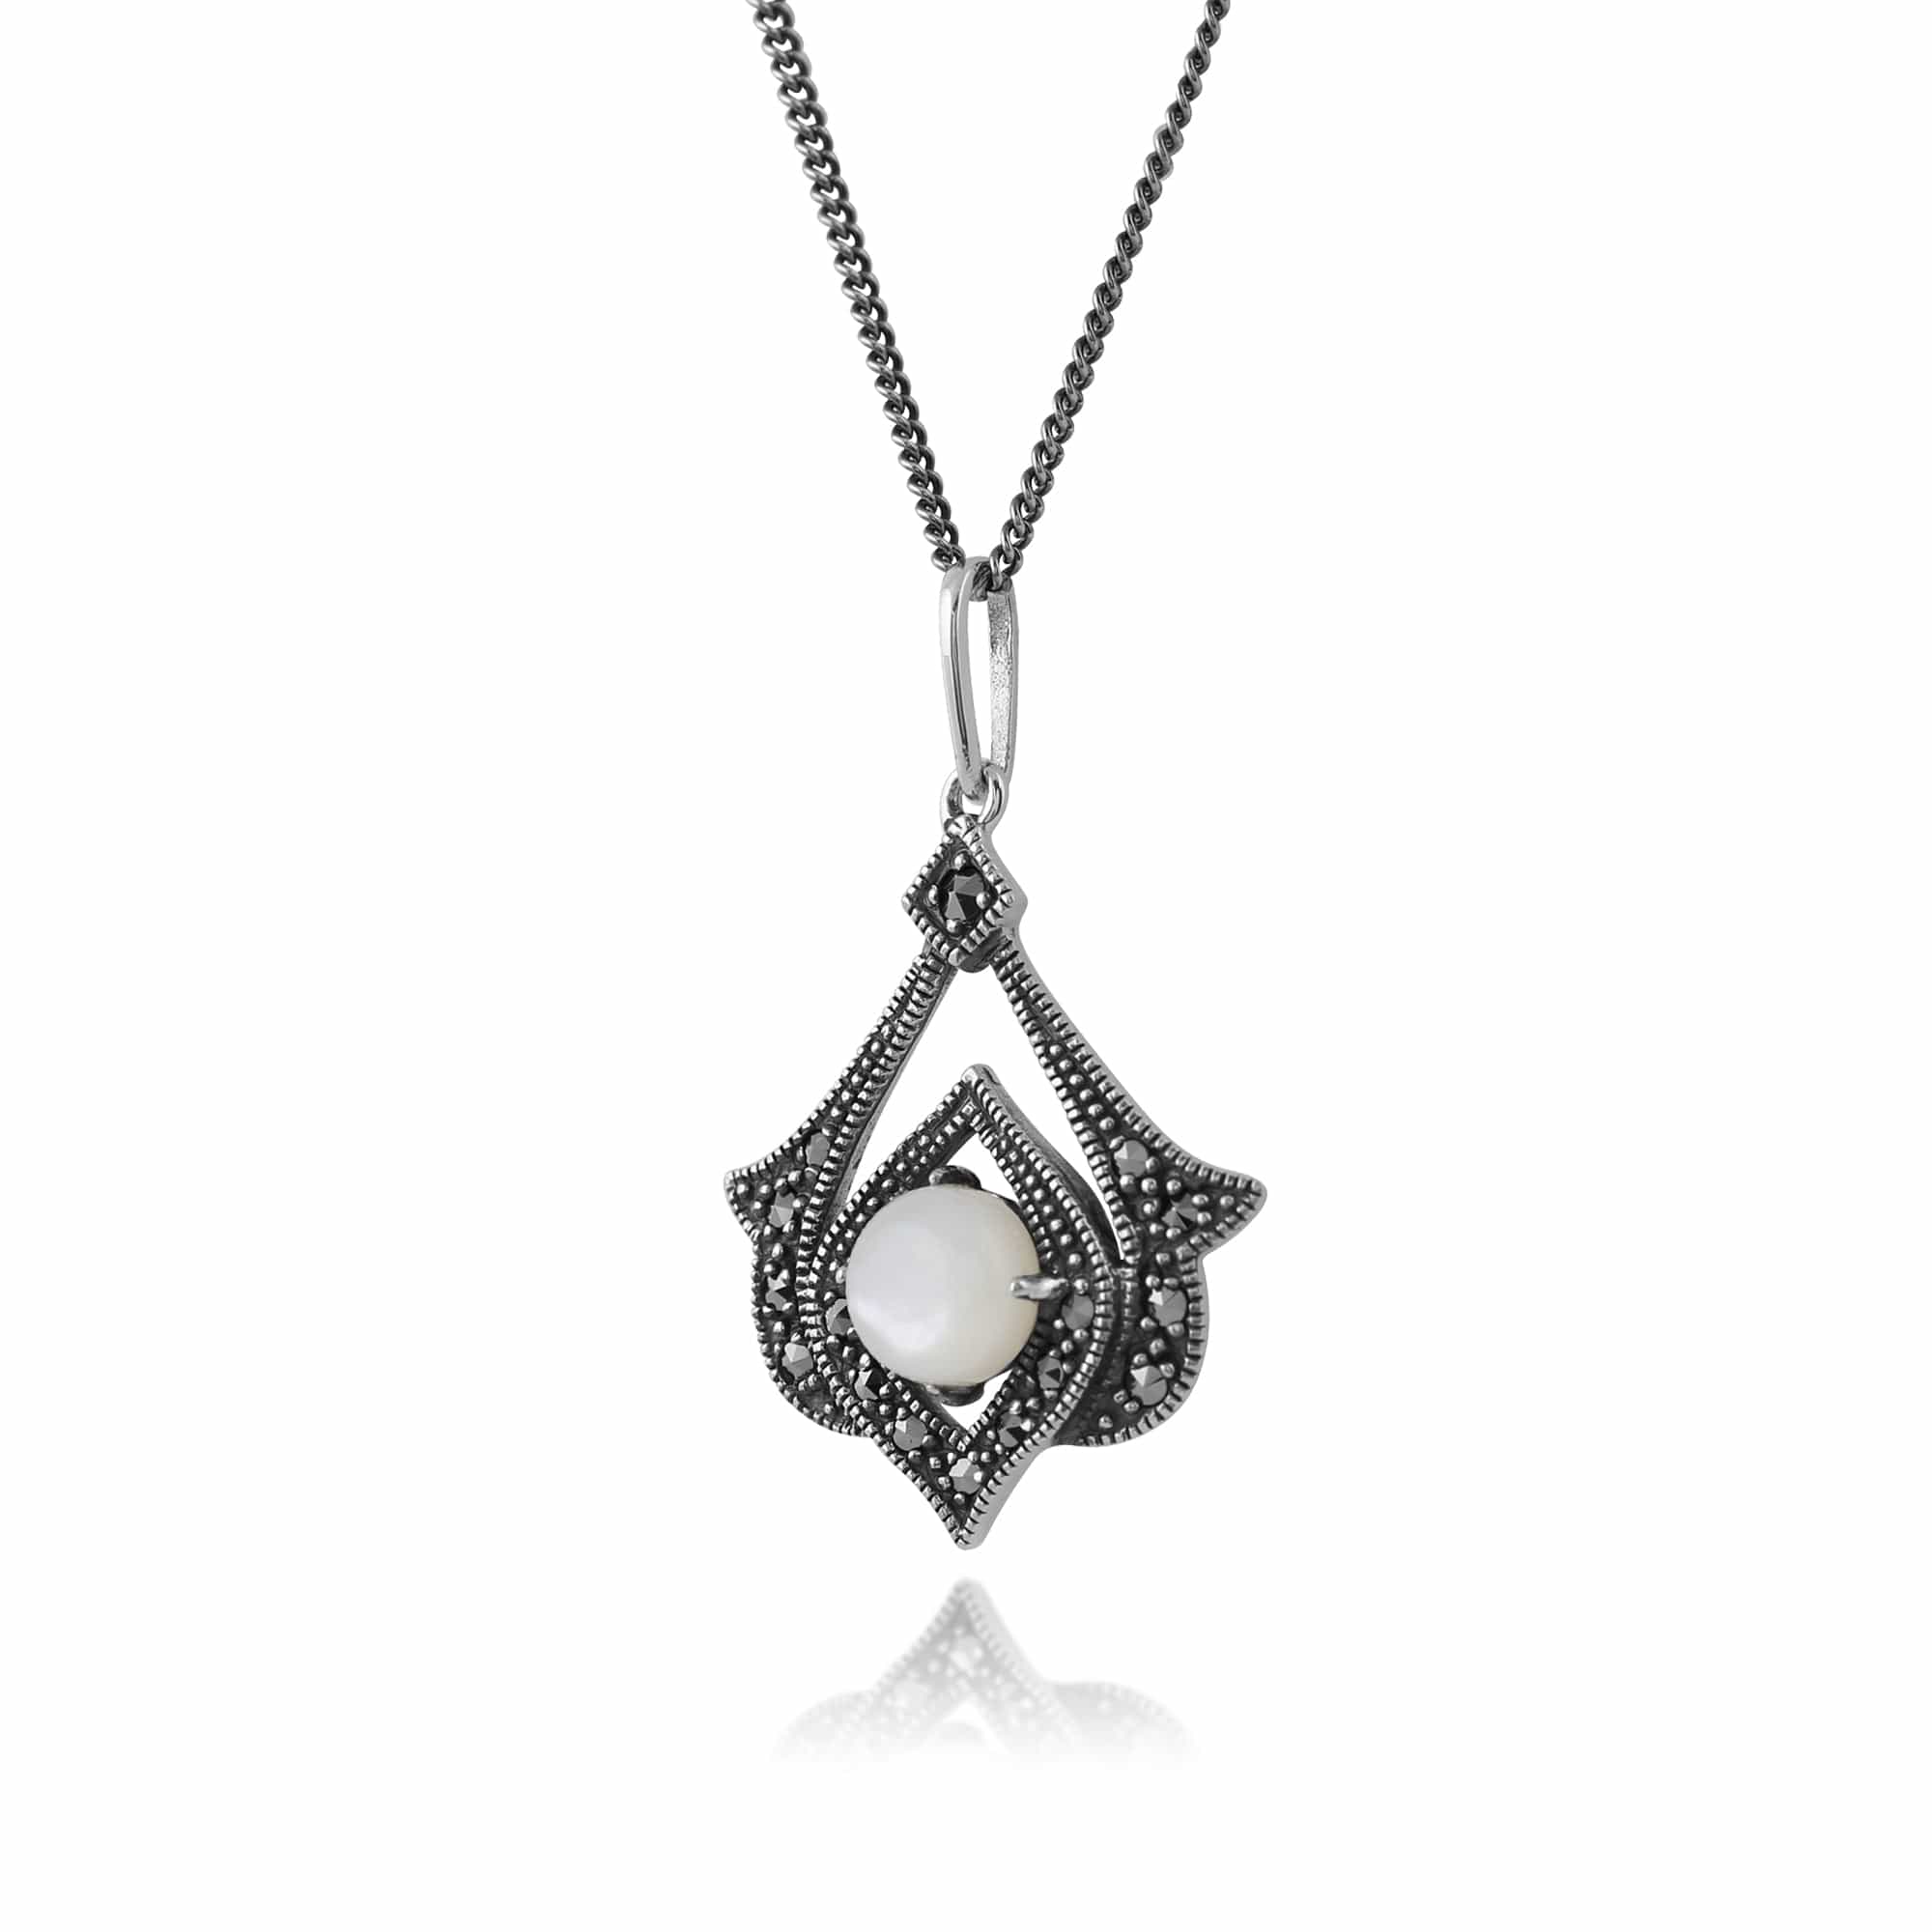 214N517101925 Art Nouveau Style Mother of Pearl & Marcasite Open Work Pendant in 925 Sterling Silver 2